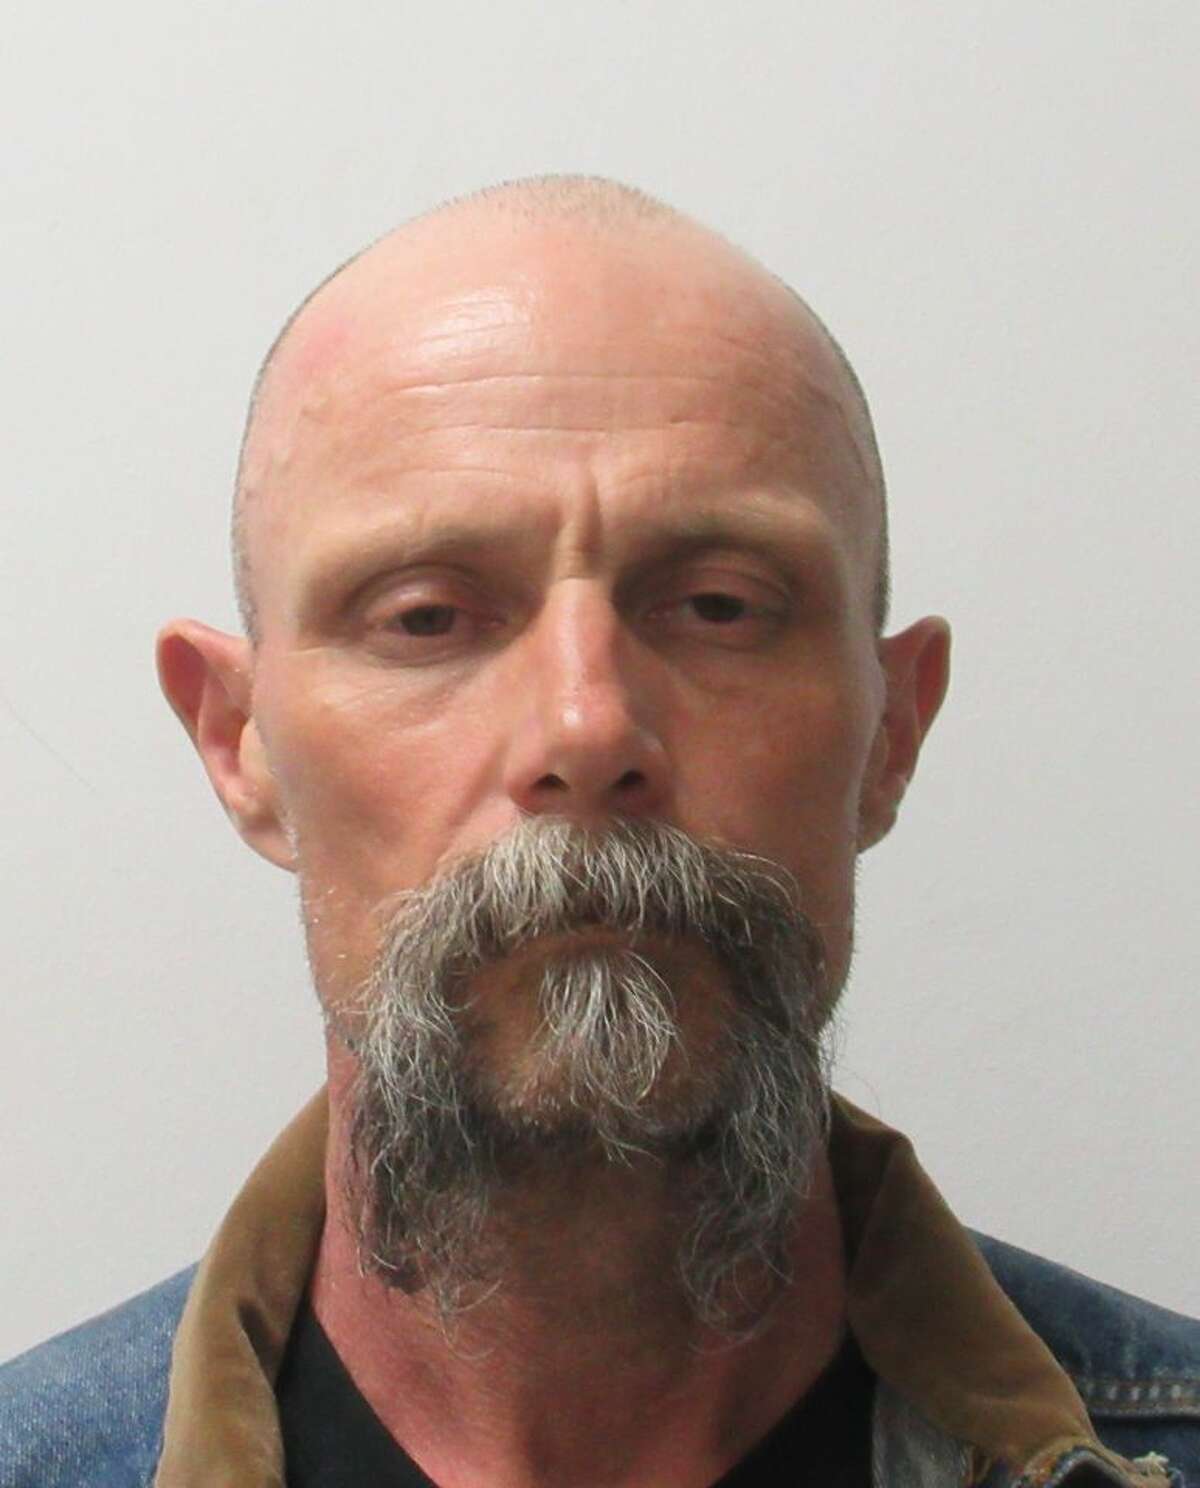 Sean Geer, 49, is wanted by the Midland County Sheriff's Office for failing to comply with sex offender duty to register.